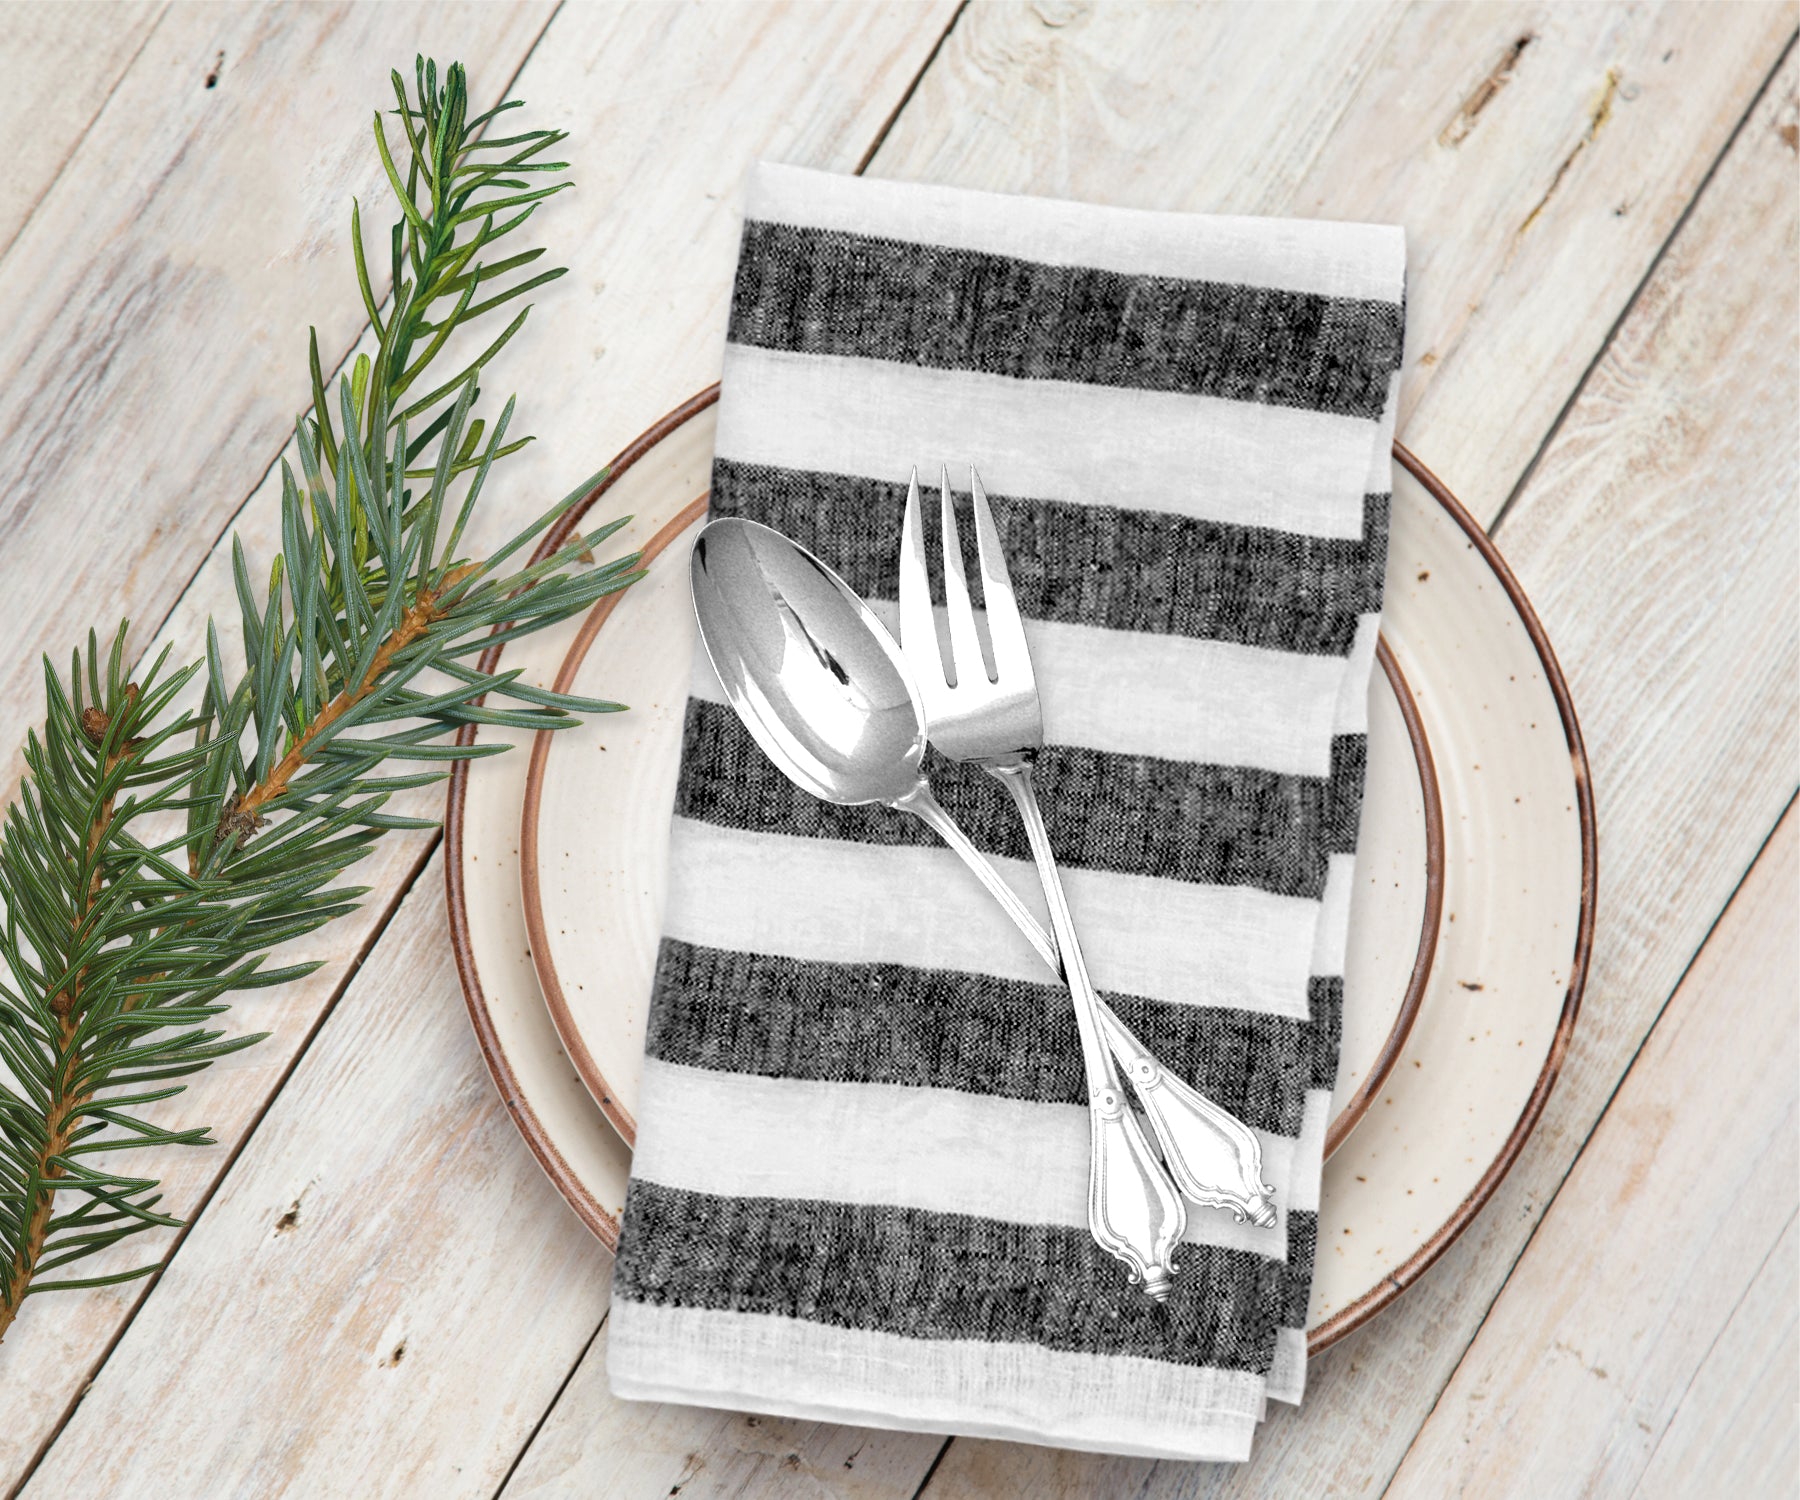 Elegant linen cloth napkins suitable for any gathering, adding refinement to your table decor.